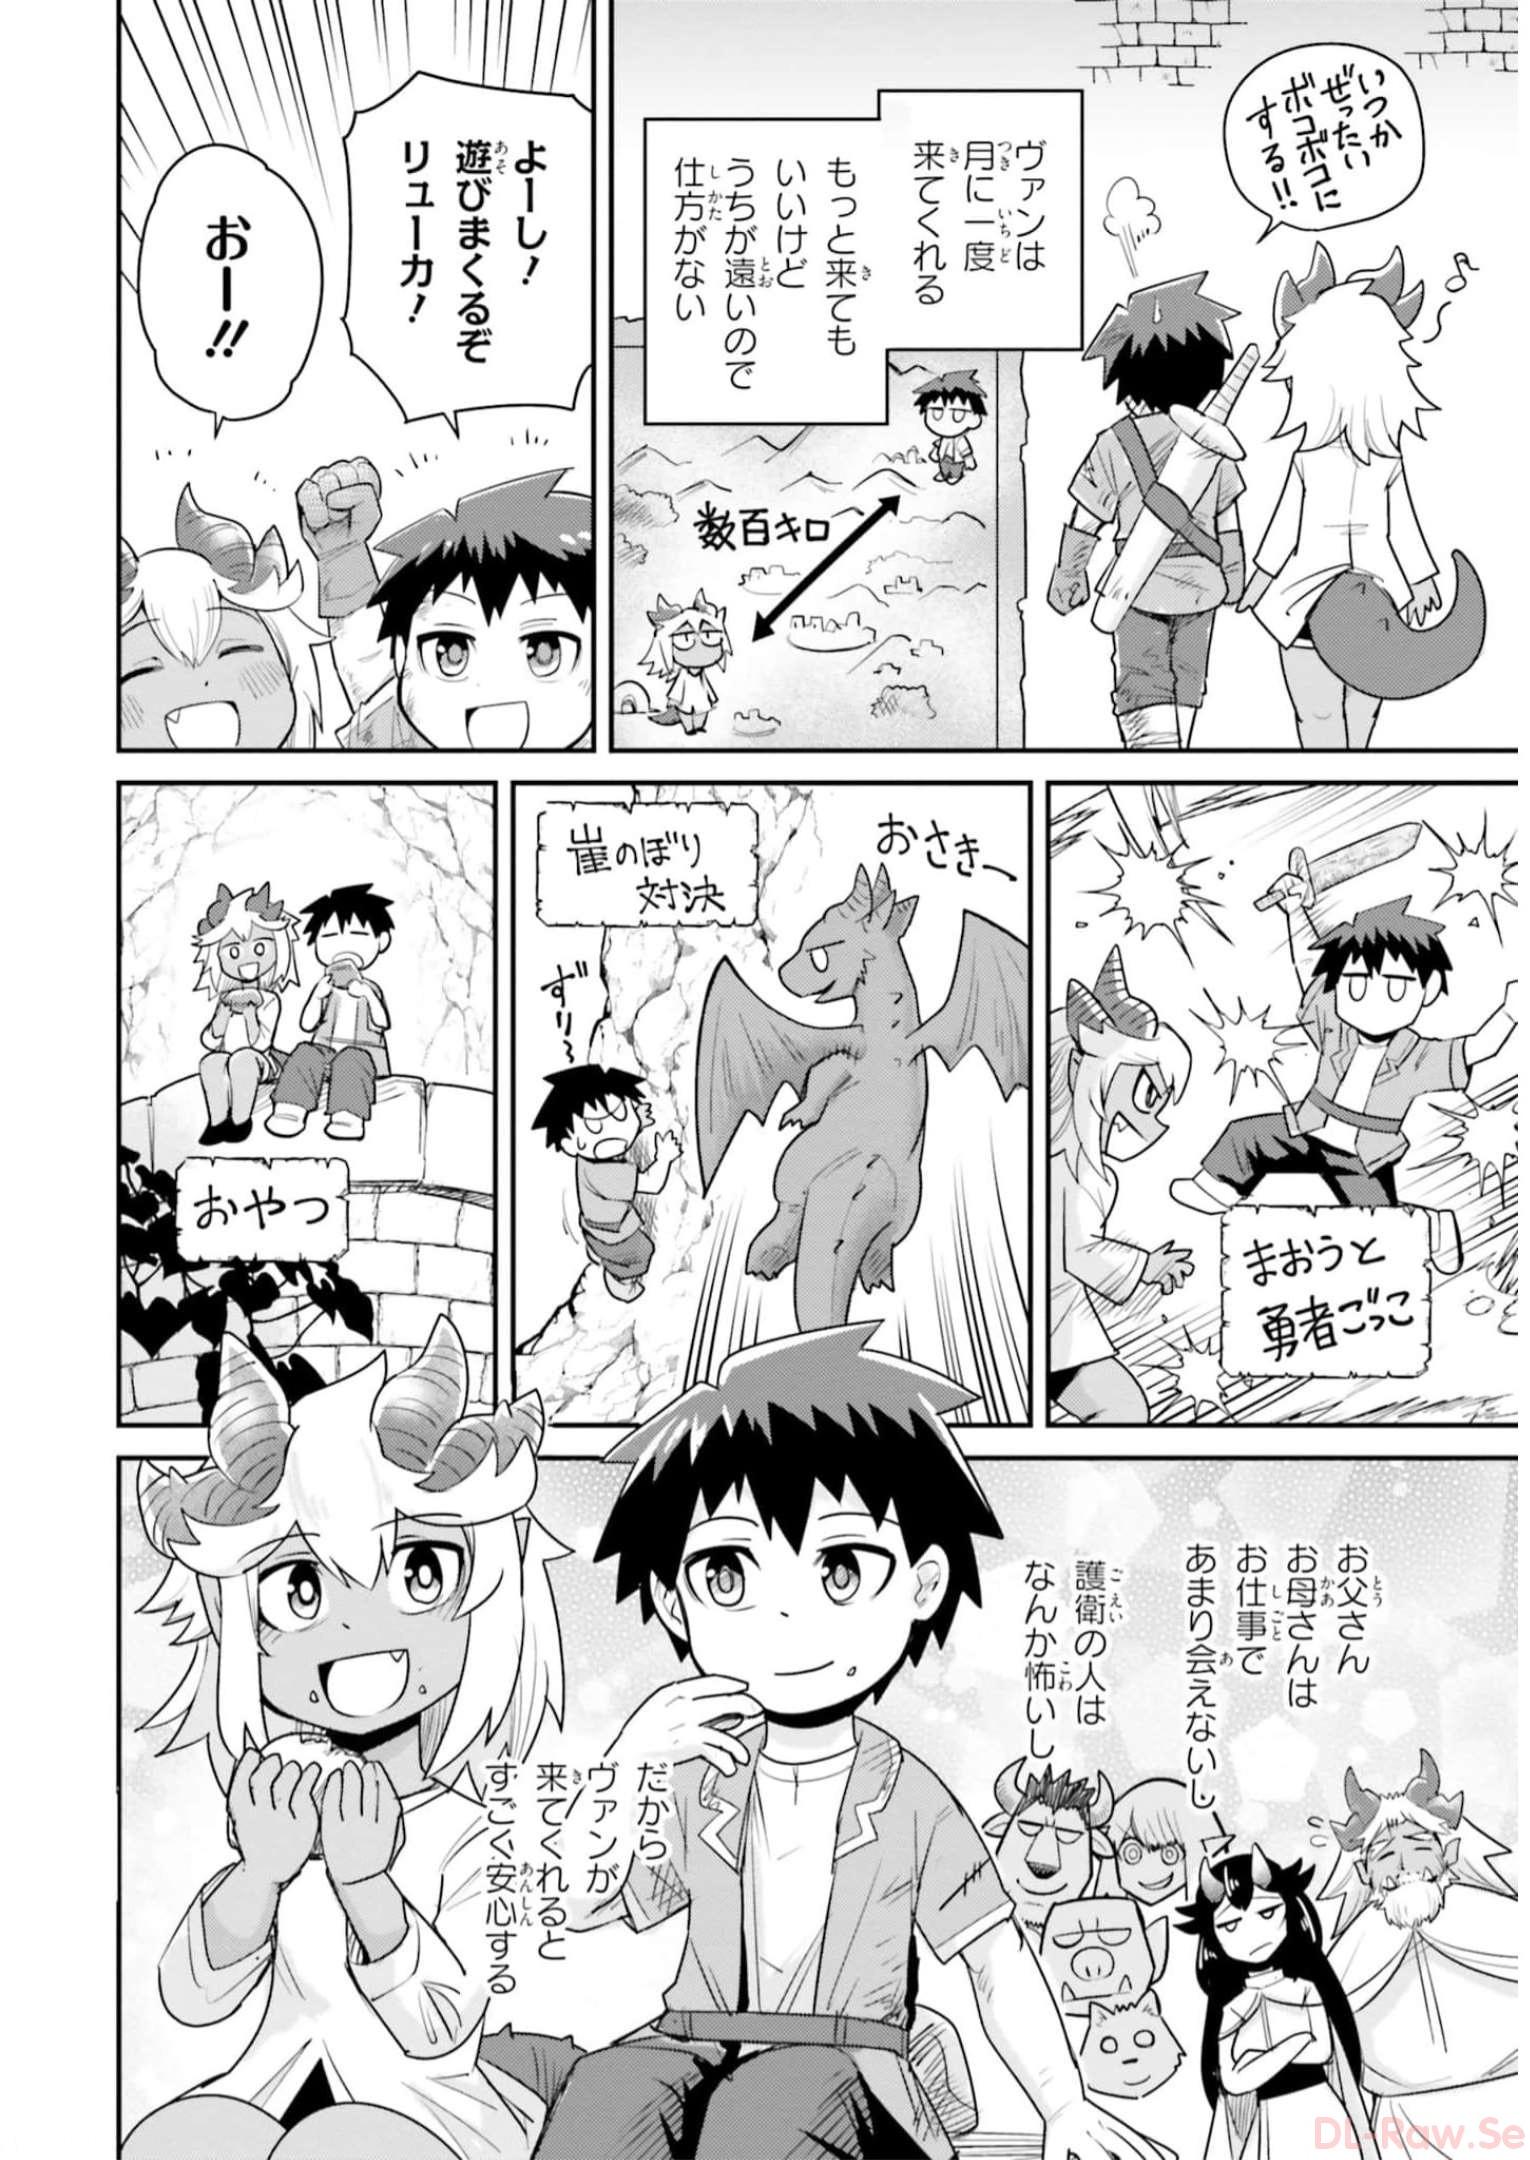 Dungeon Friends Forever Dungeon’s Childhood Friend ダンジョンの幼なじみ 第18.1話 - Page 2